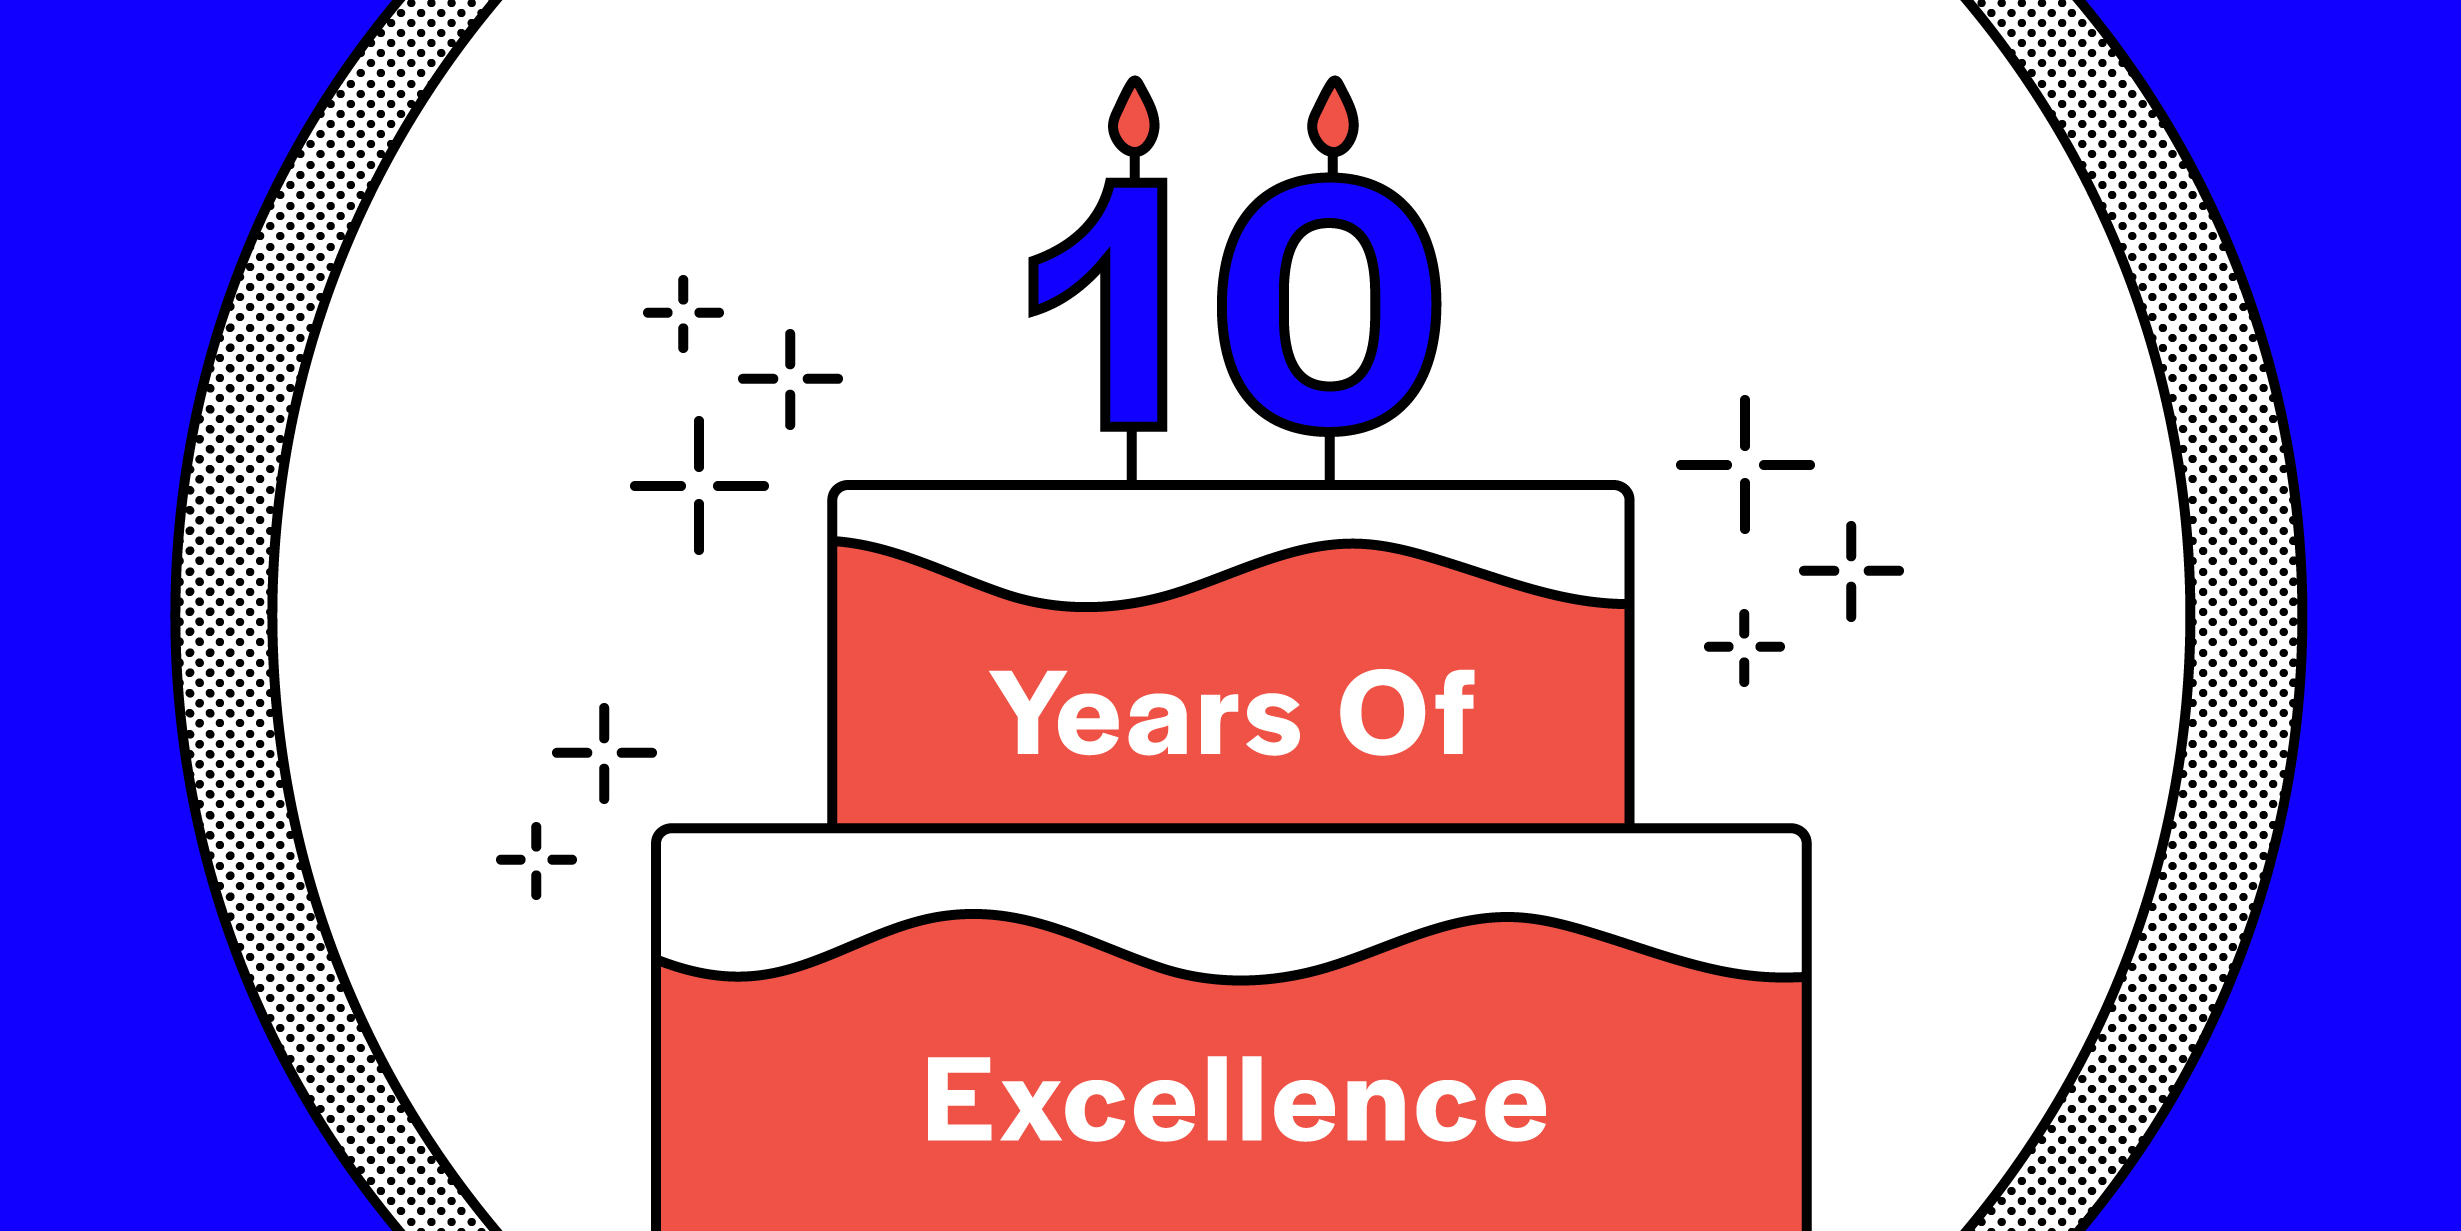 10 years of excellence blog cover image - Square 205 Website Design & Marketing Agency in Denton, Texas